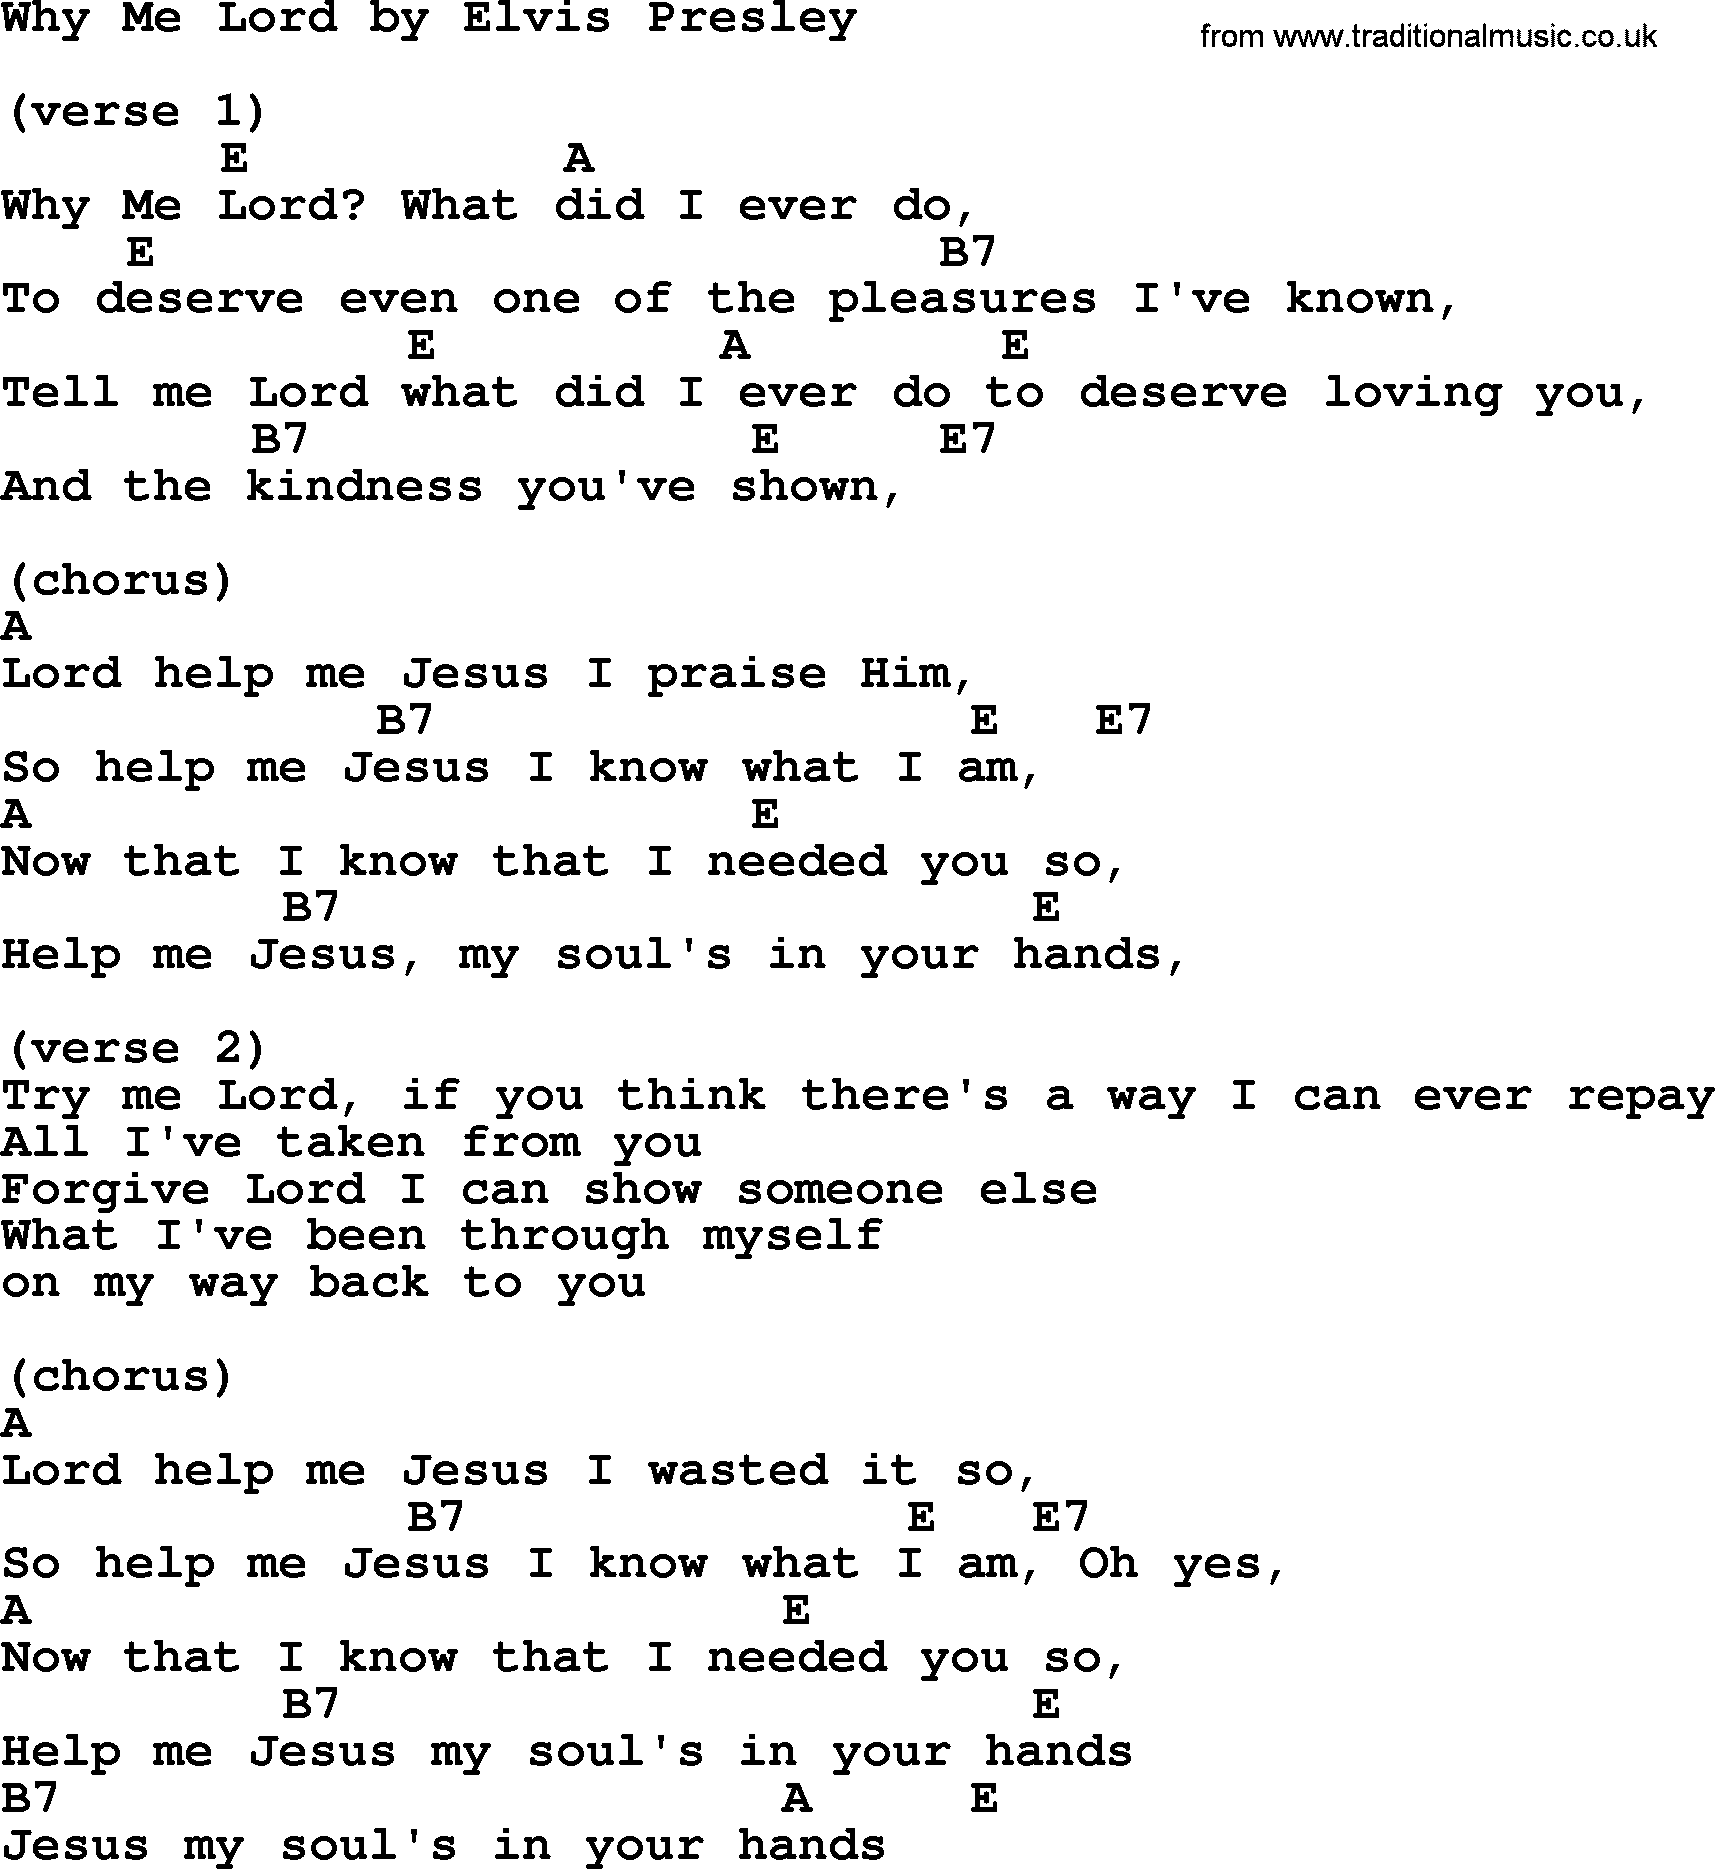 Why Me Lord, by Elvis Presley - lyrics and chords